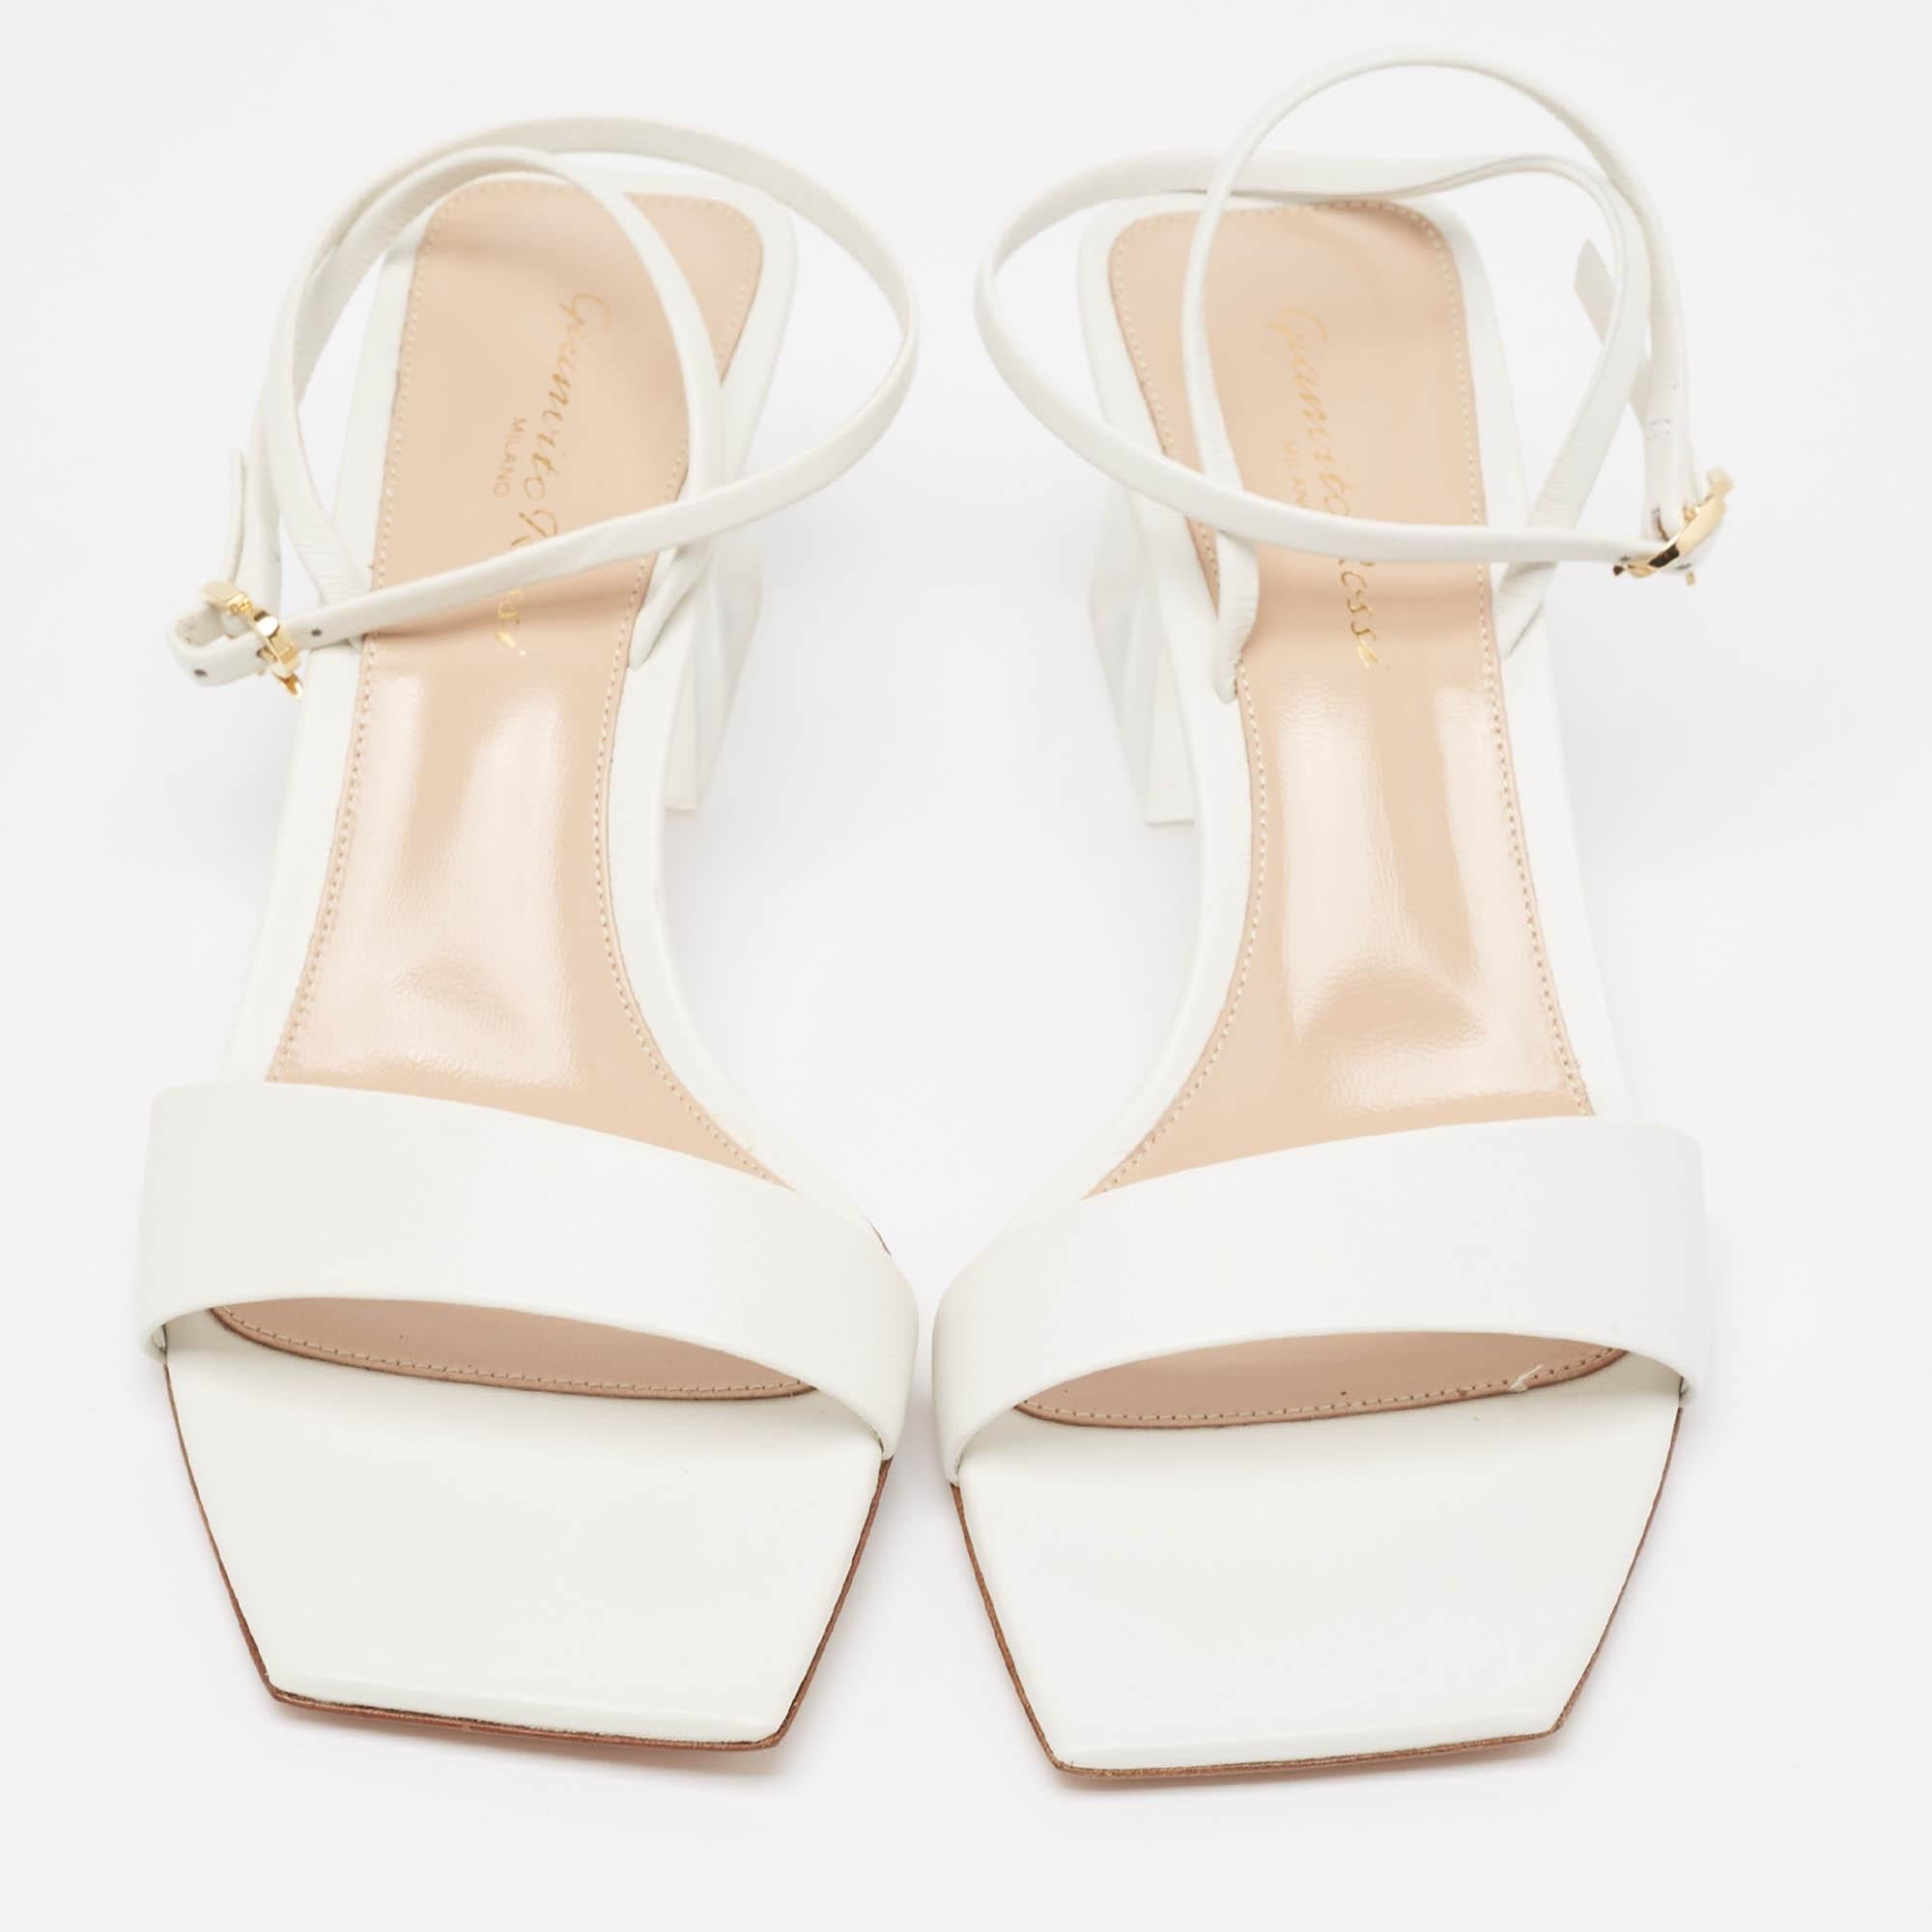 These Gianvito Rossi sandals will offer you both luxury and comfort. Made from quality materials, they come in a classy white with 5.5 cm clear heels.

Includes: Original Dustbag, Original Box, Info Card

